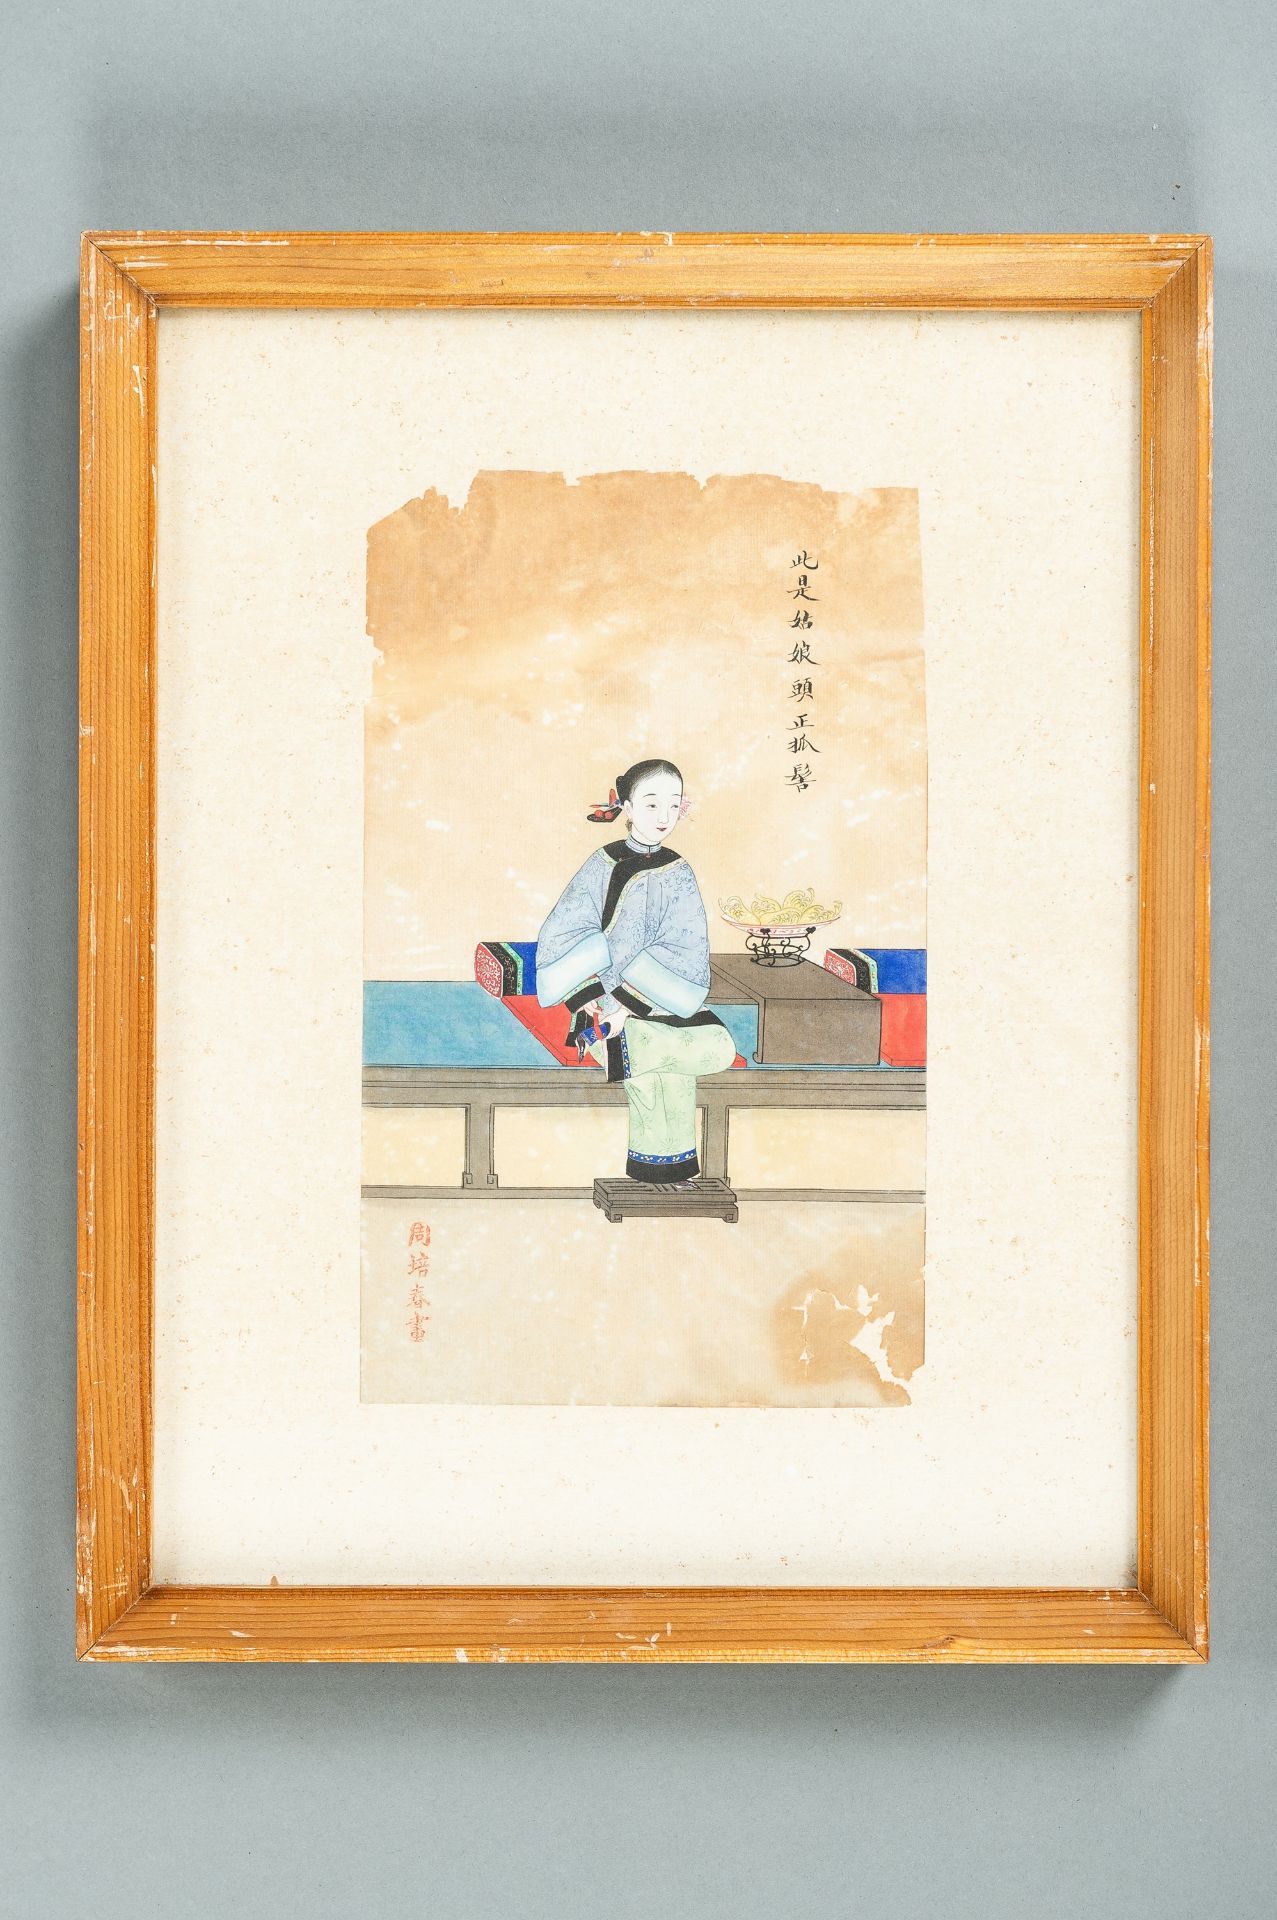 ZHOU PEI CHUN (active 1880-1910): A PAINTING OF A COURT LADY ADJUSTING HER SHOES, 1900s - Image 2 of 5